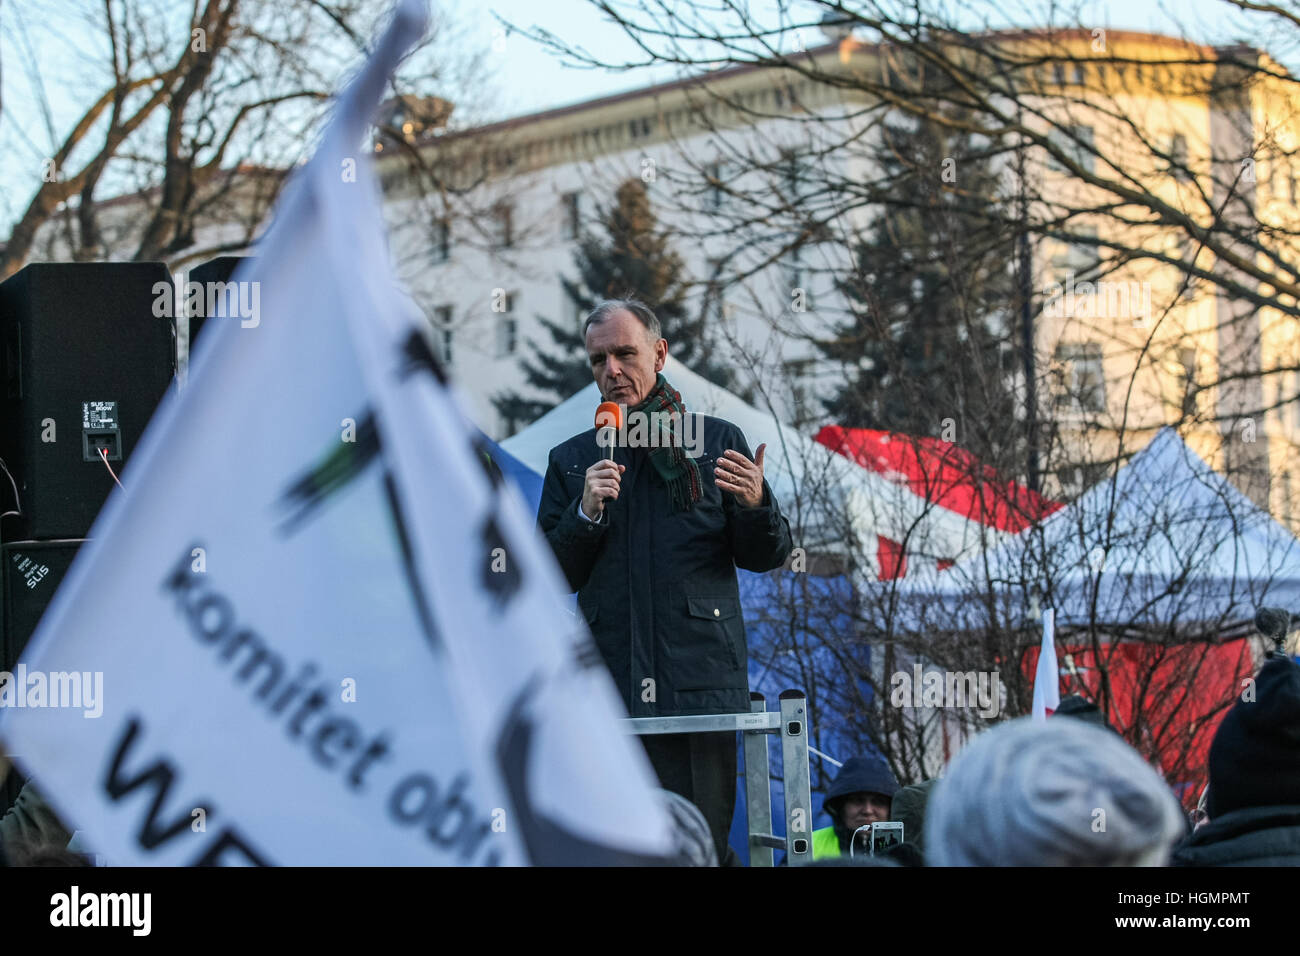 Warsaw, Poland 11th, Jan. 2017 Bogdan Klich - Senate member is seen. Committee for Defence of Democracy (KOD) protest outside the Polish Parliament (Sejm). Protesters demand to respect Polish Law by the PiS ruling party Parliament Members and government during the disputed budget bill. Credit: Michal Fludra/Alamy Live News Stock Photo